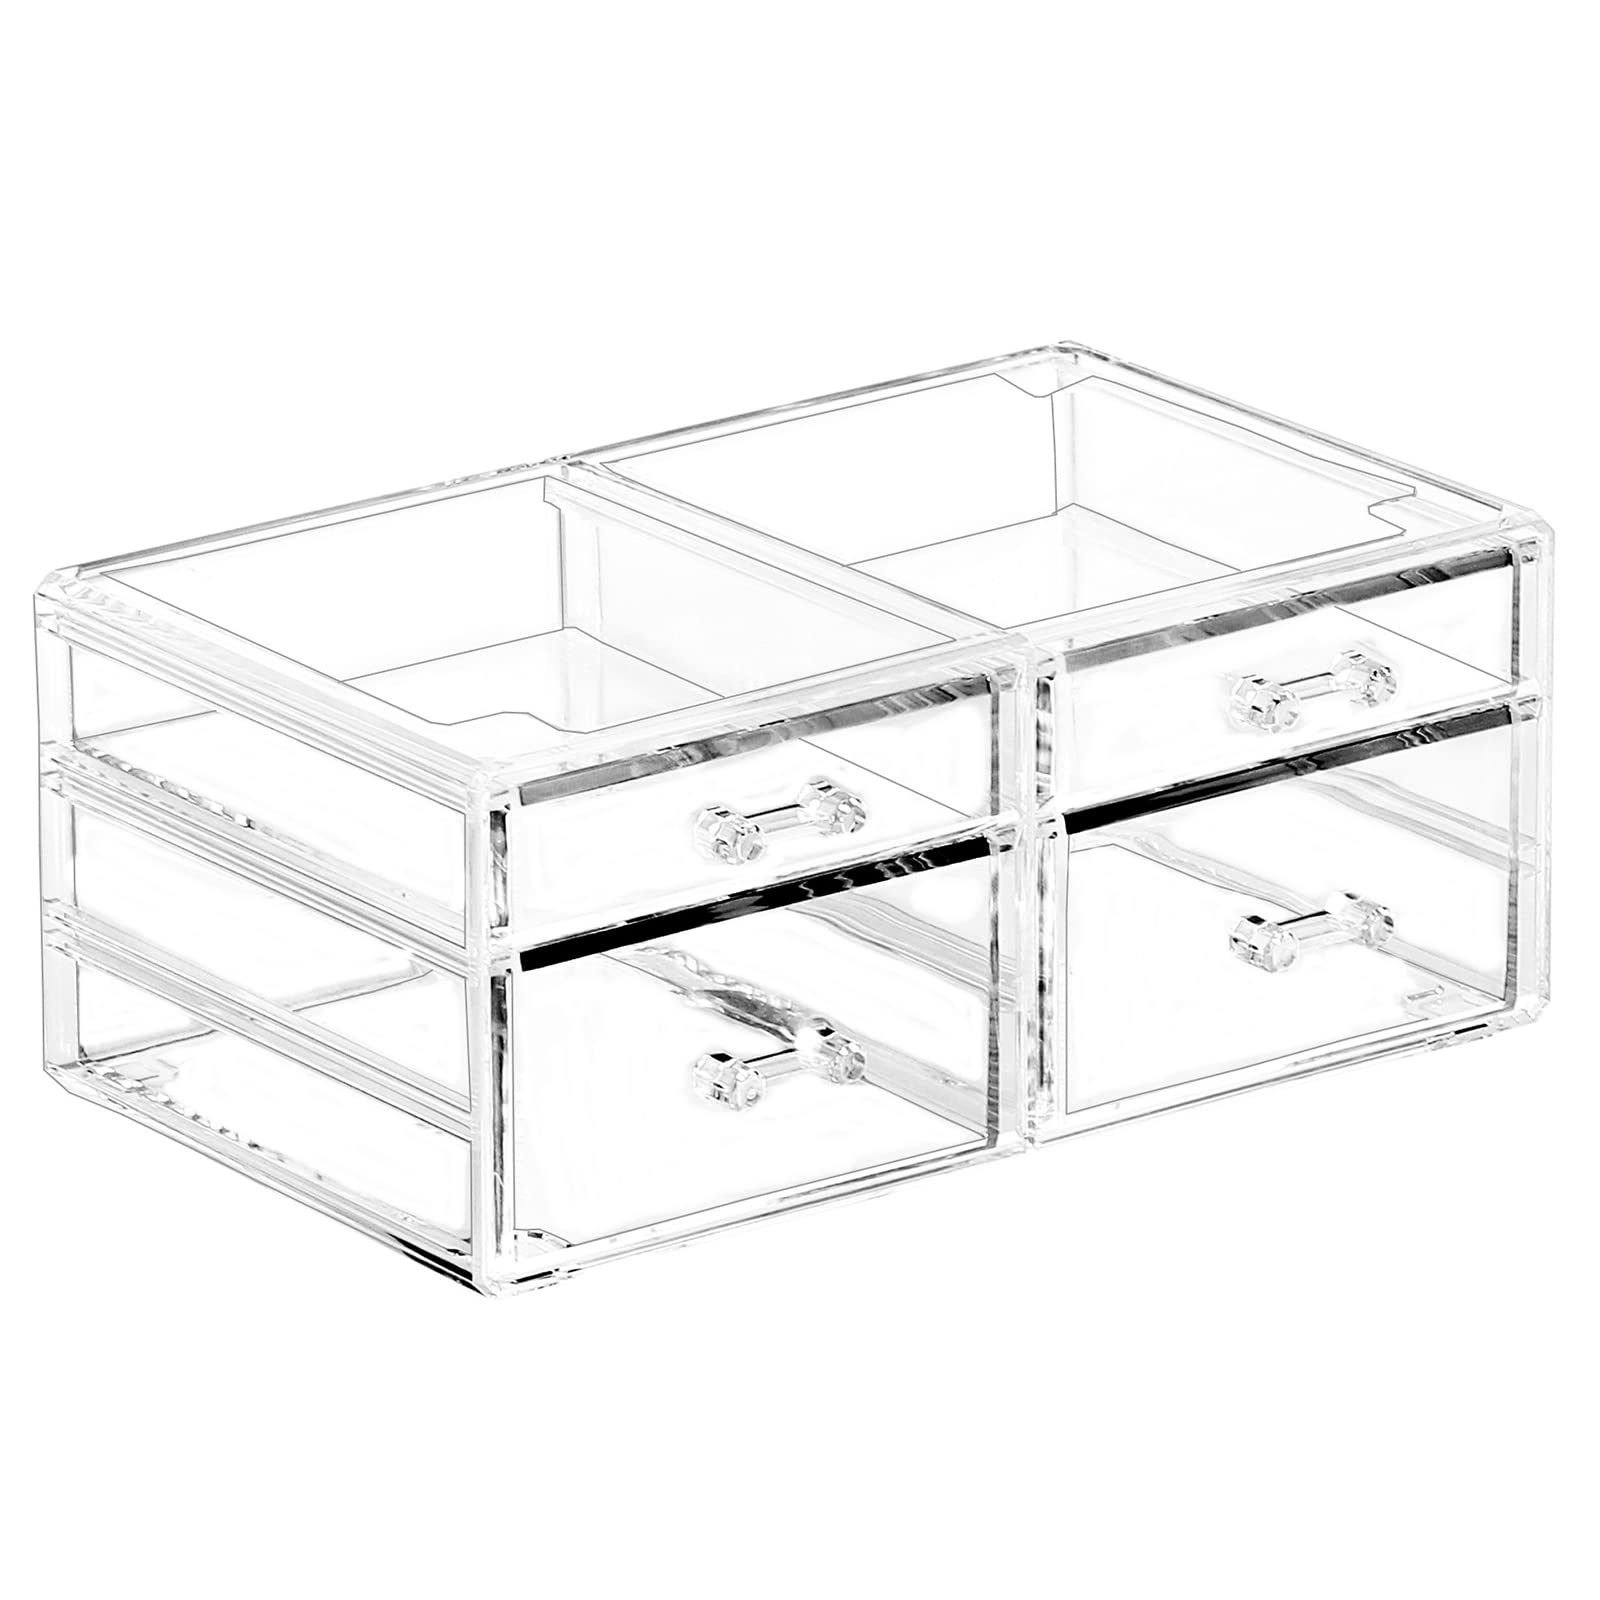 Cq acrylic Makeup Organizer and Storage Stackable Skin Care Cosmetic Display Case Make up Stands For Jewelry Hair Accessories Beauty Skincare Product Organizing Clear 4 Drawers